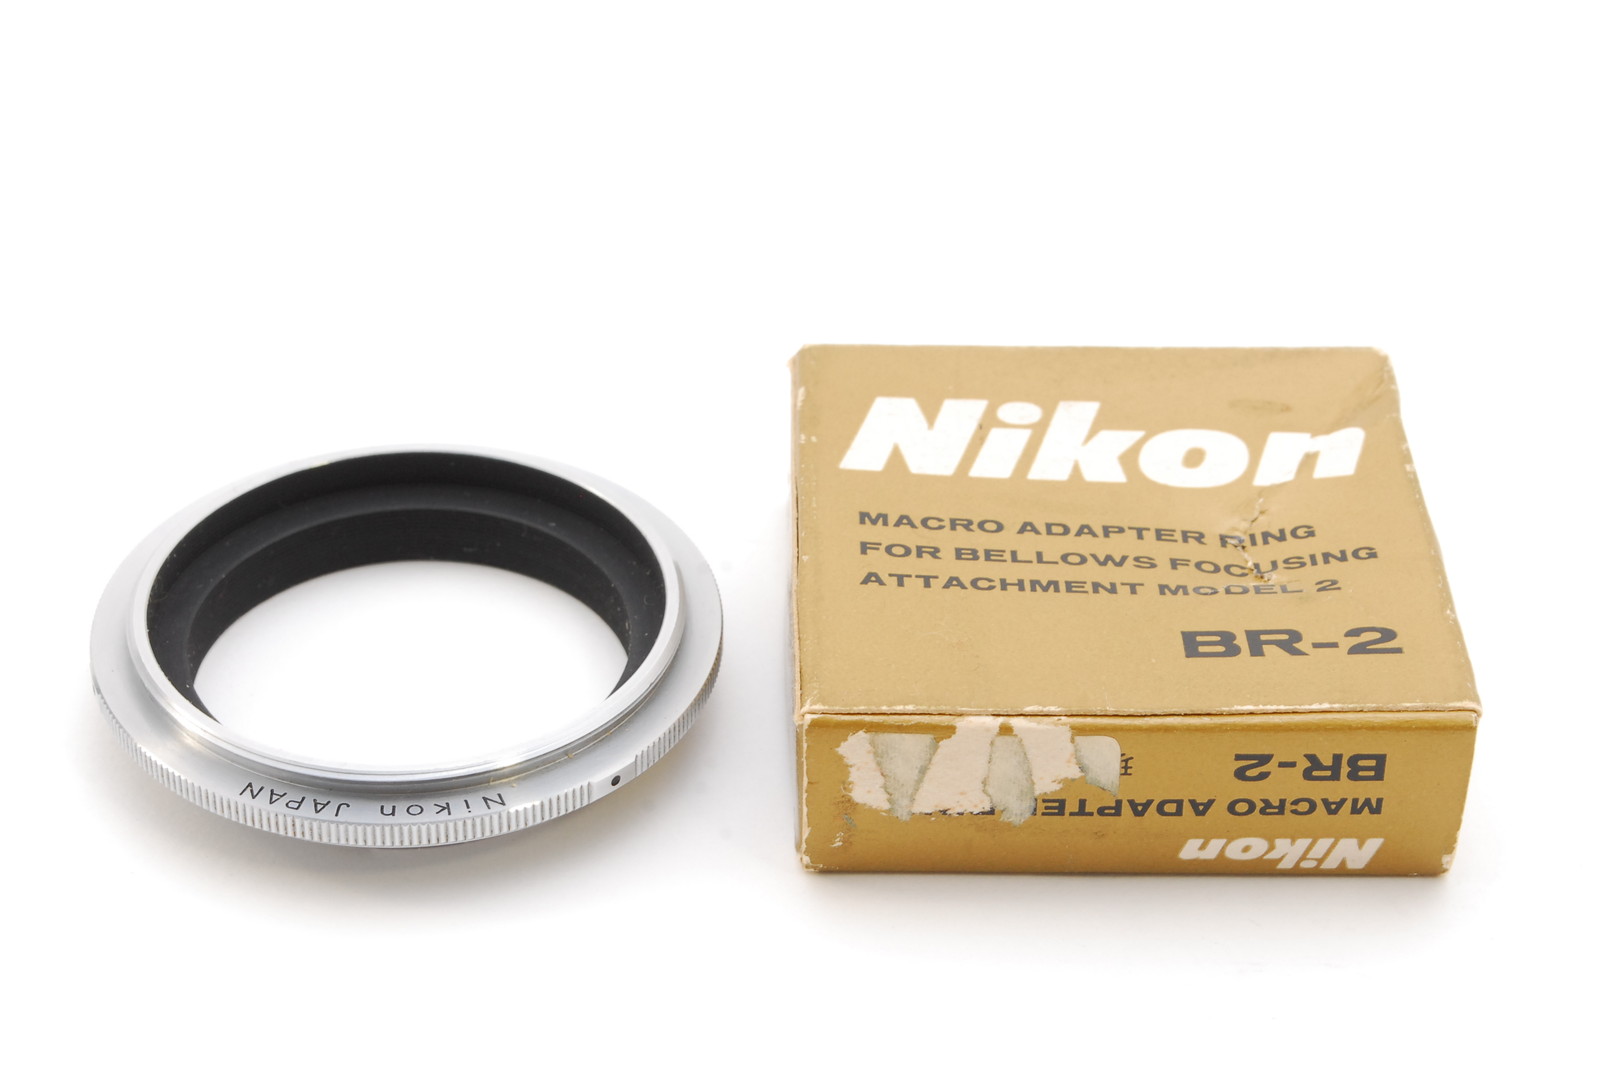 PROMOTION. NEAR MINT Nikon MACRO ADAPTER RING BD-2 for BELLOWS FOCUSING ATTACHMENT MODEL 2, Box from Japan